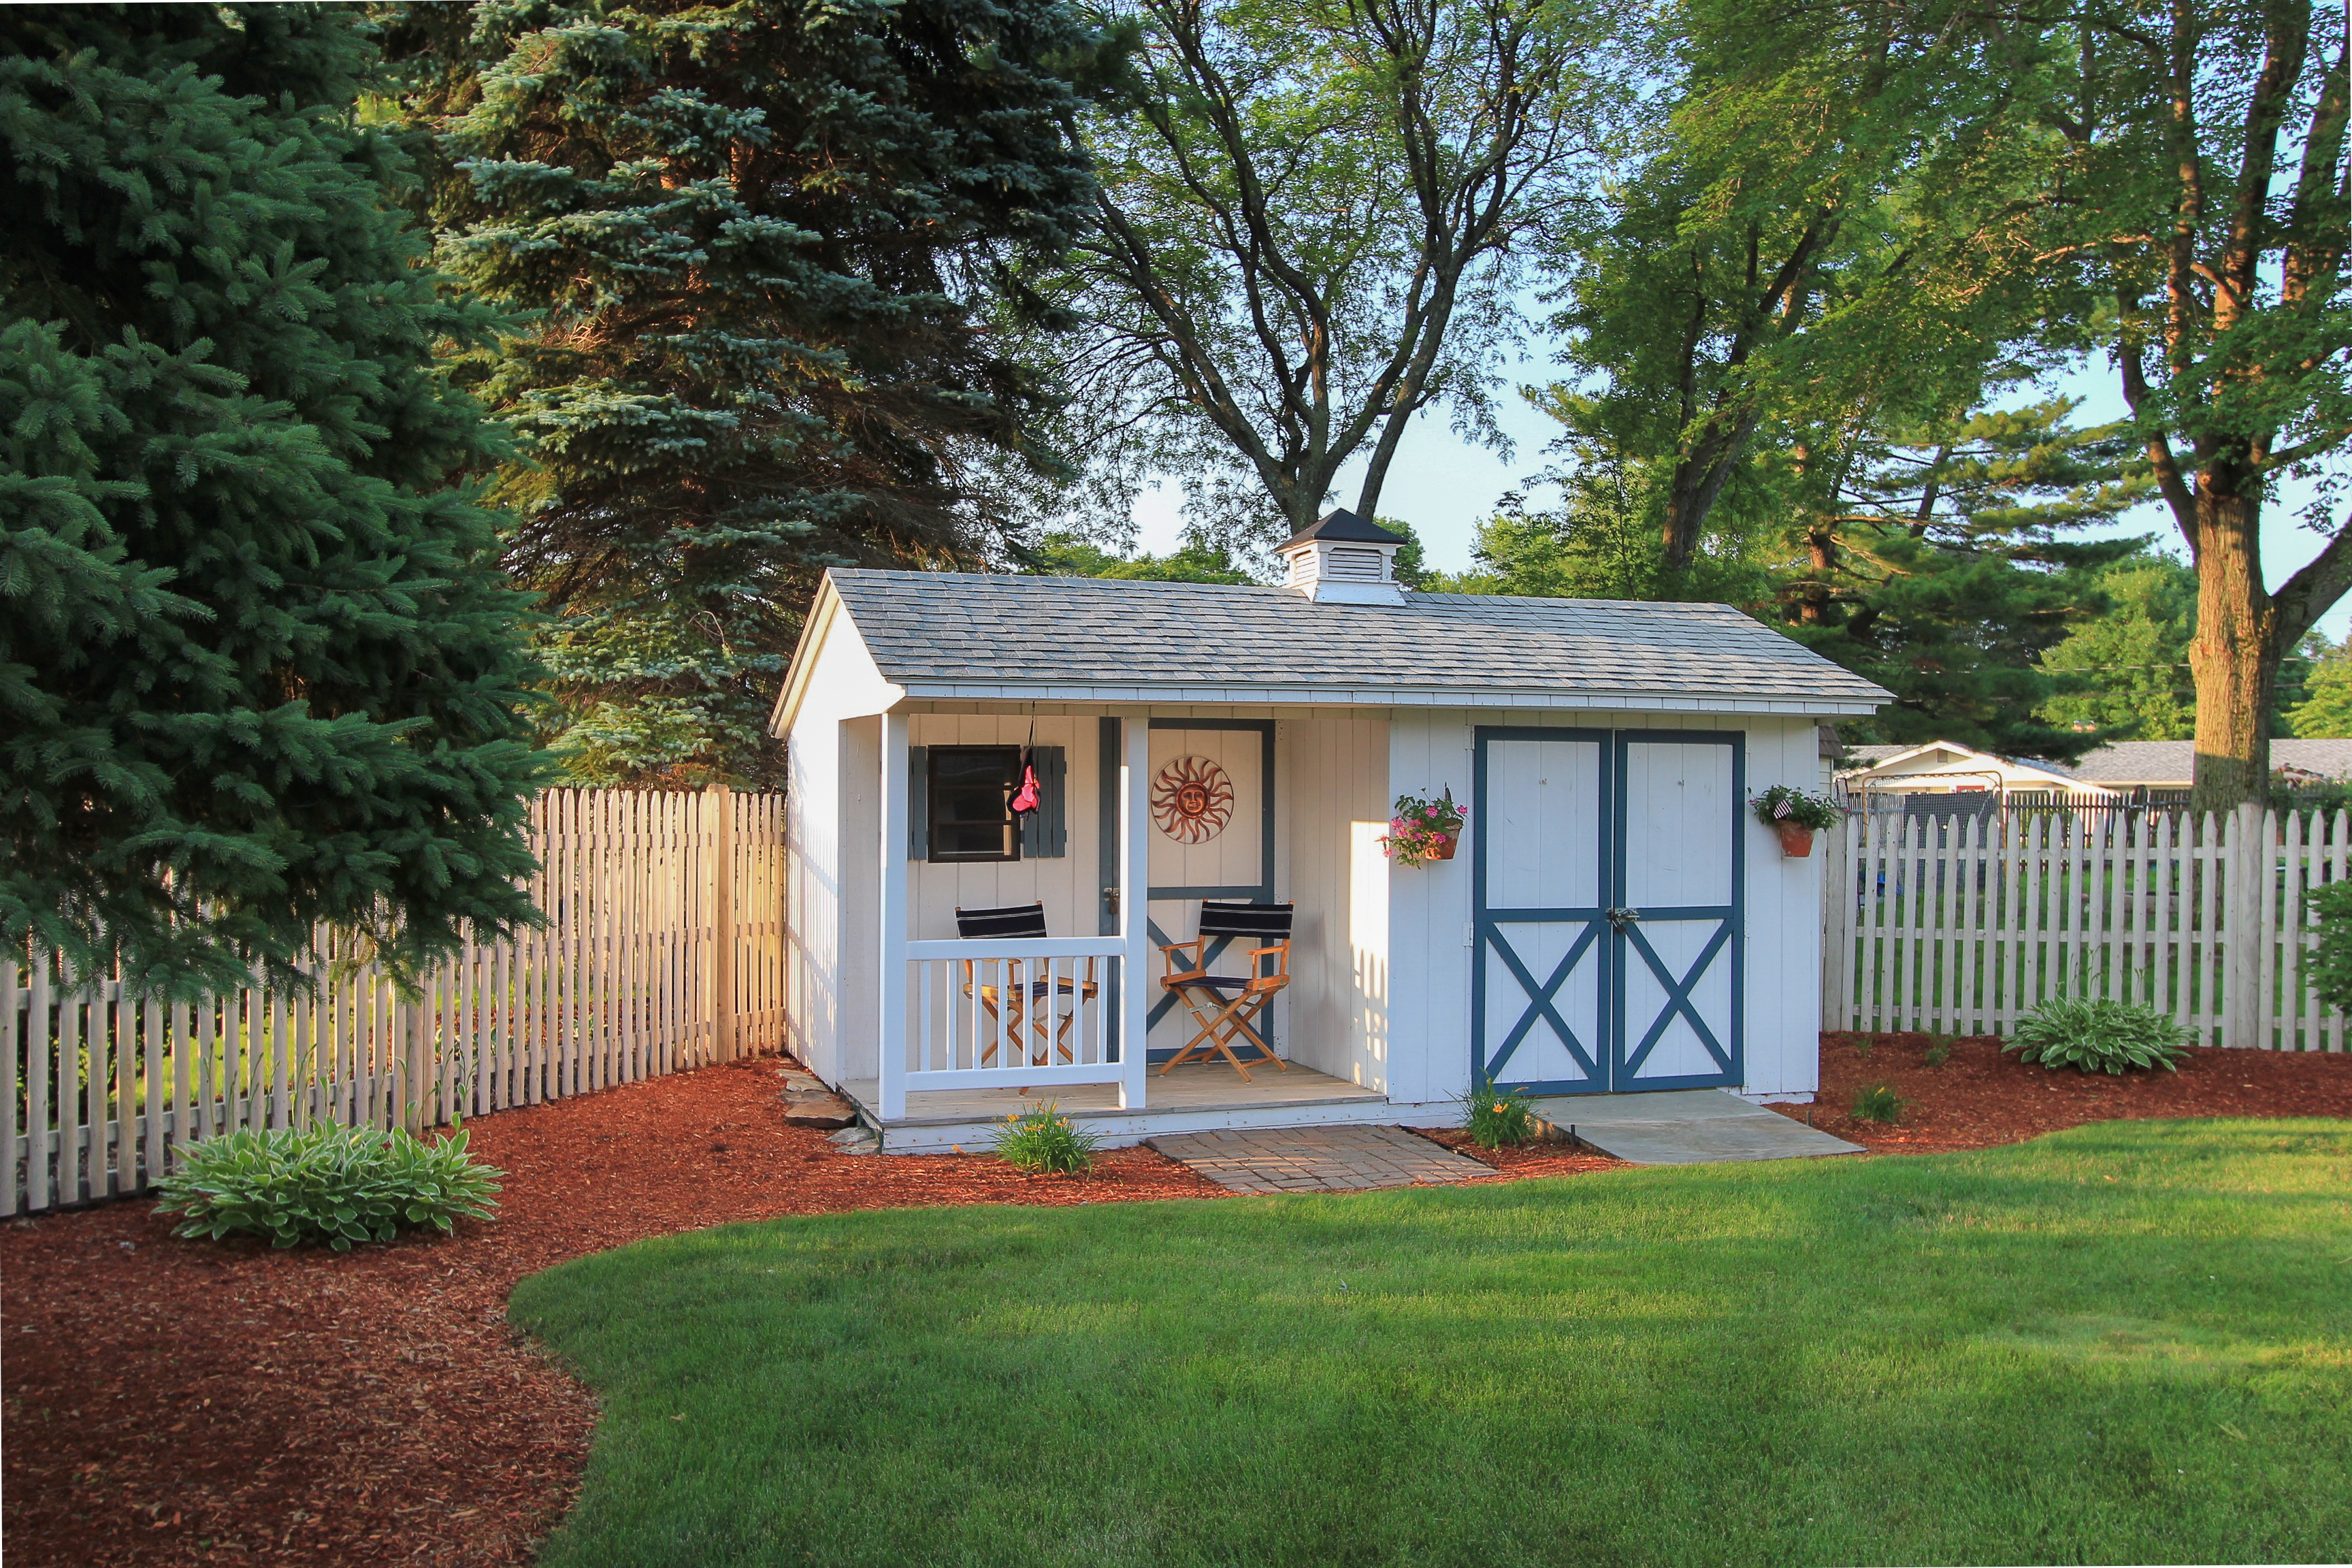 Shed at 1 Bowdoin Street in Danvers, MA